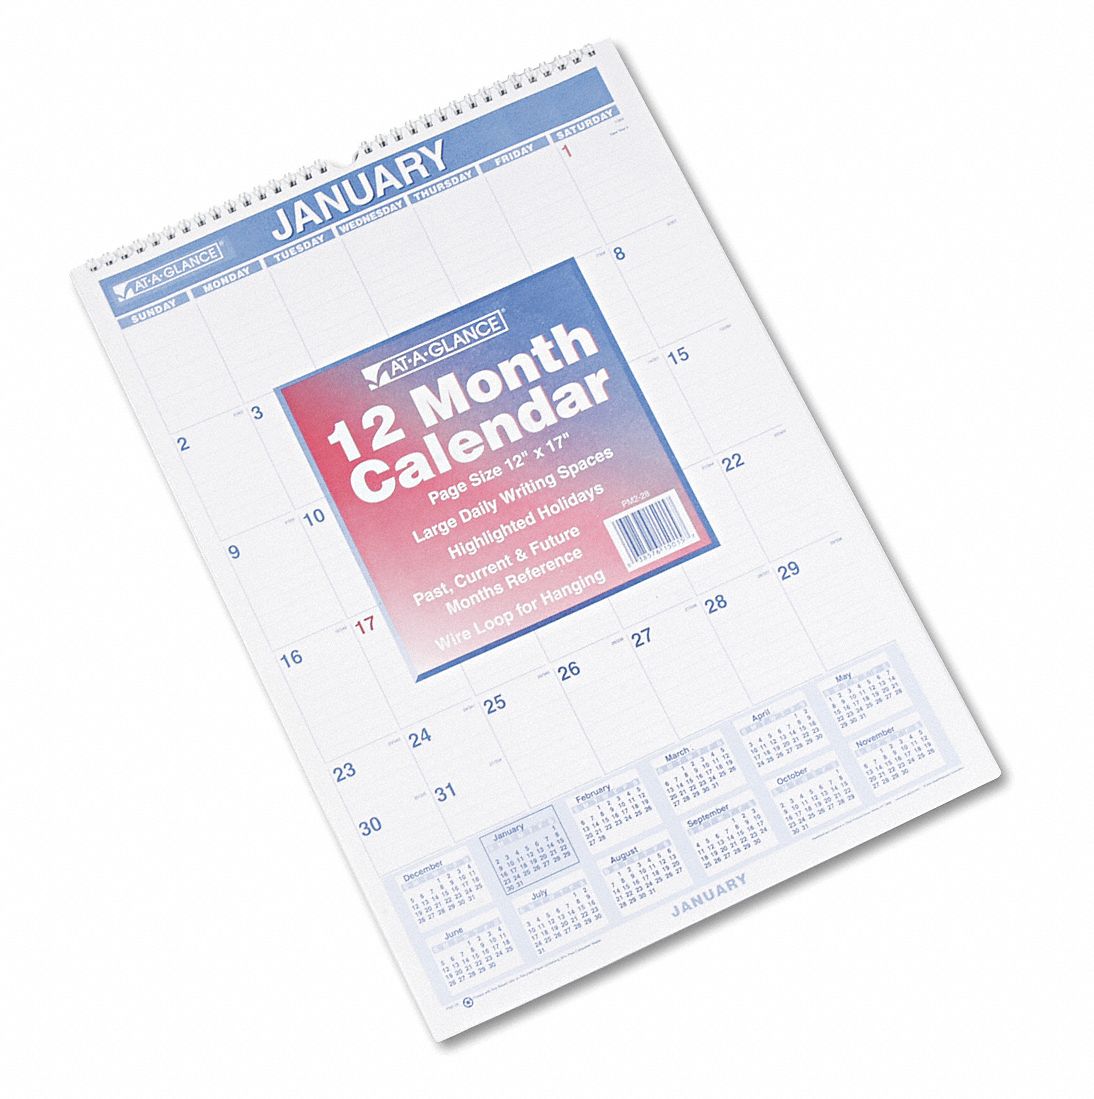 ATAGLANCE Wall Calendar, Format One Month Per Page, Sheet Size 12 x